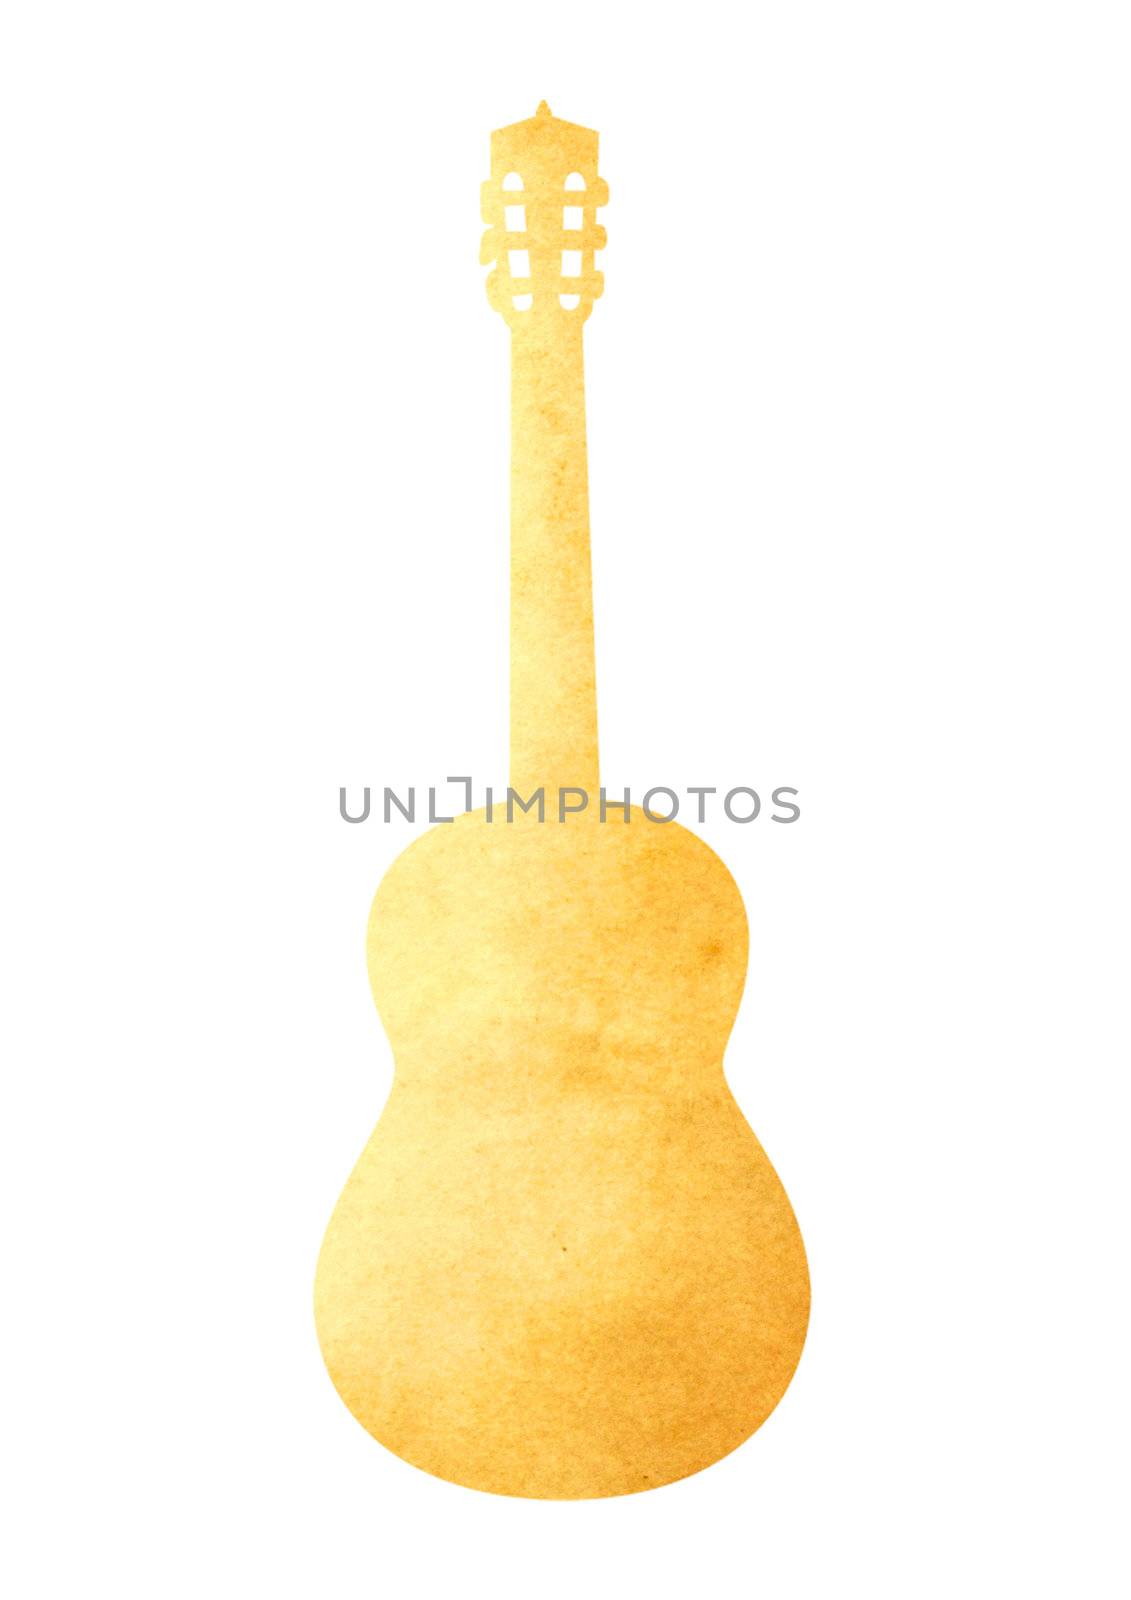 Grunge image of guitar from old paper isolated on white